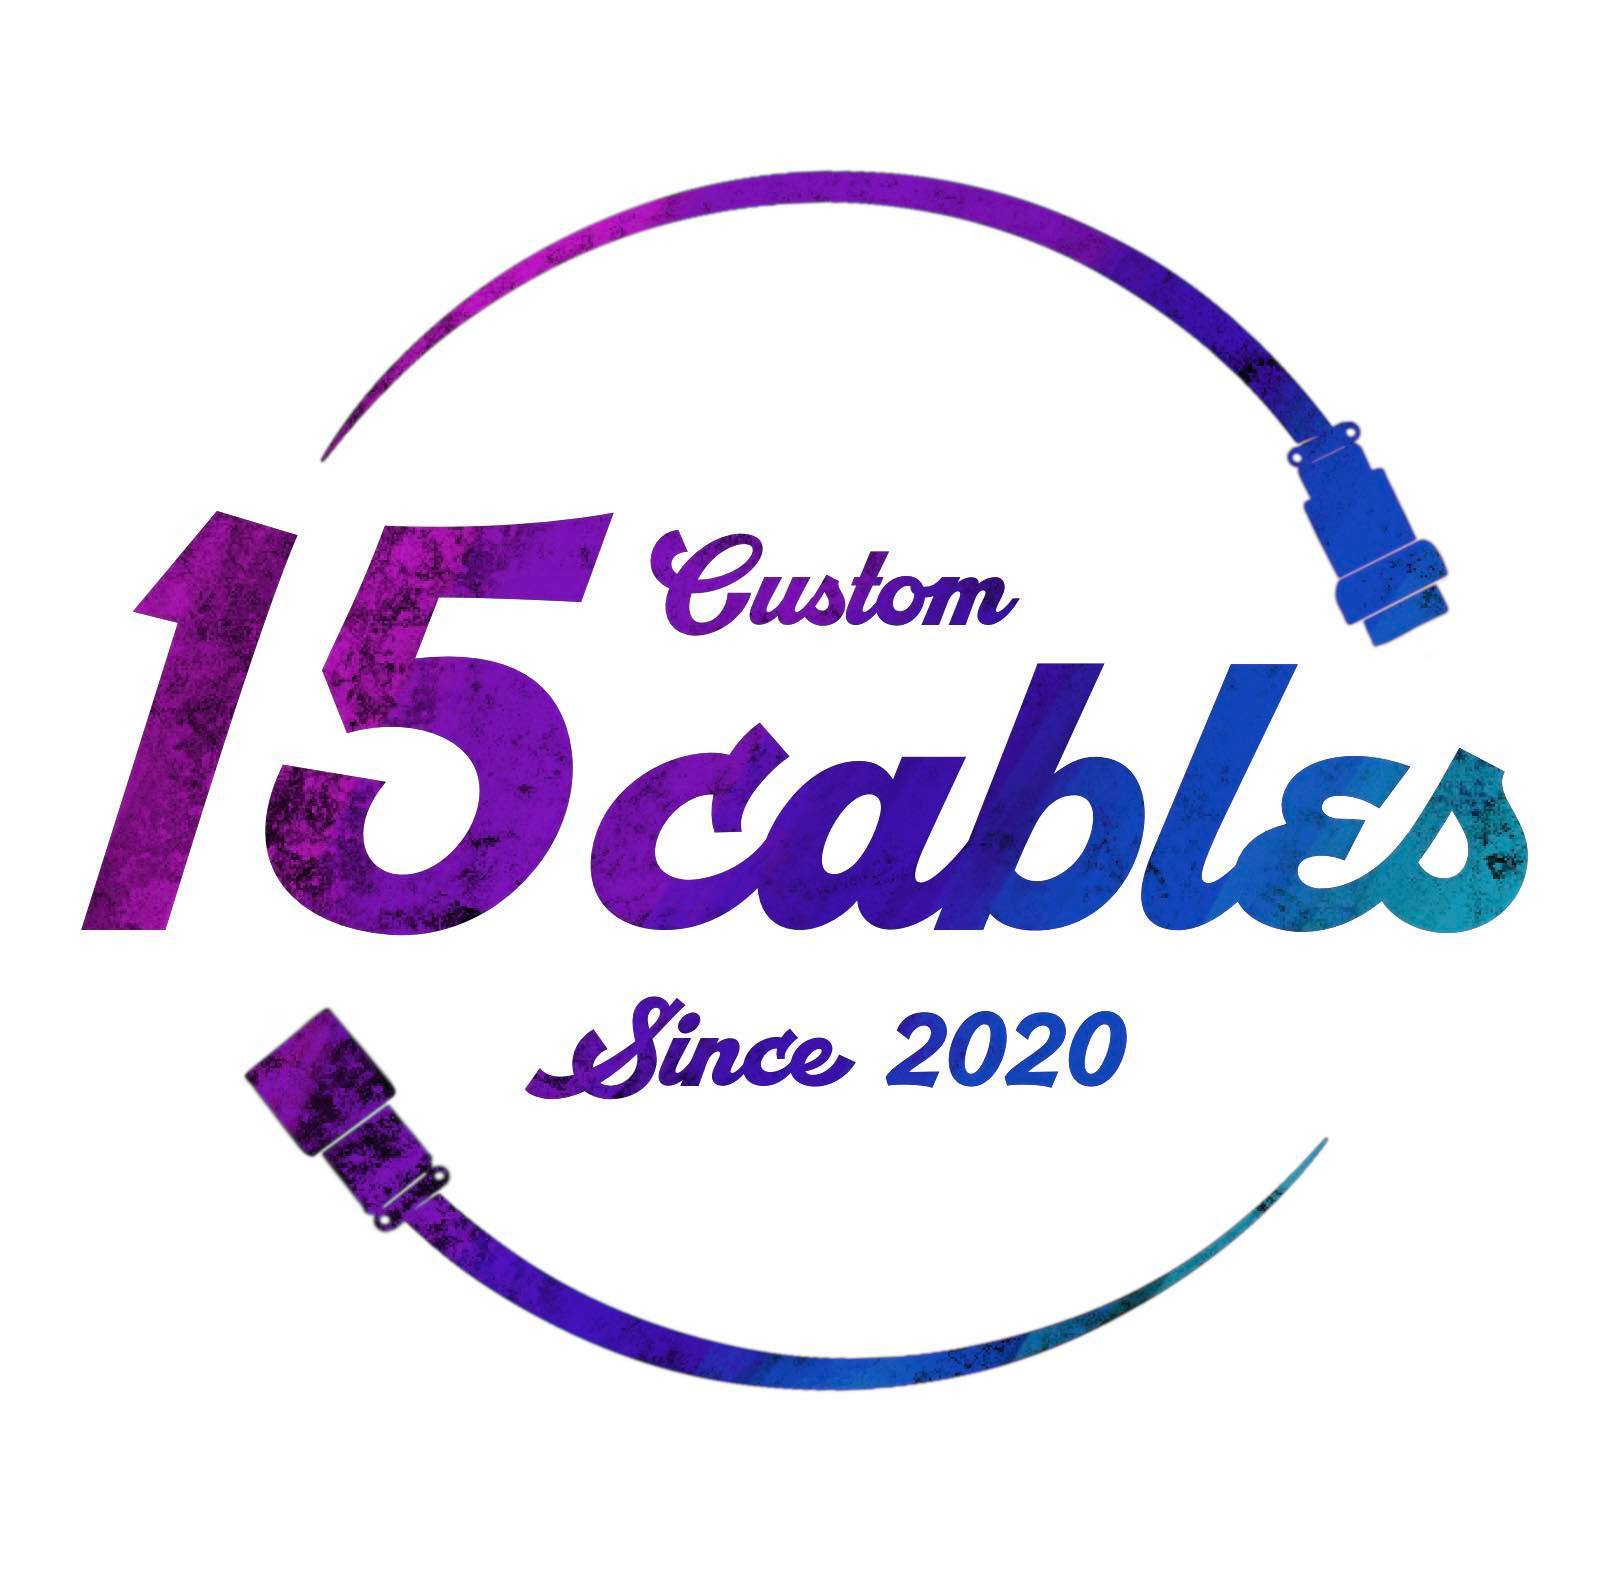 15Cables